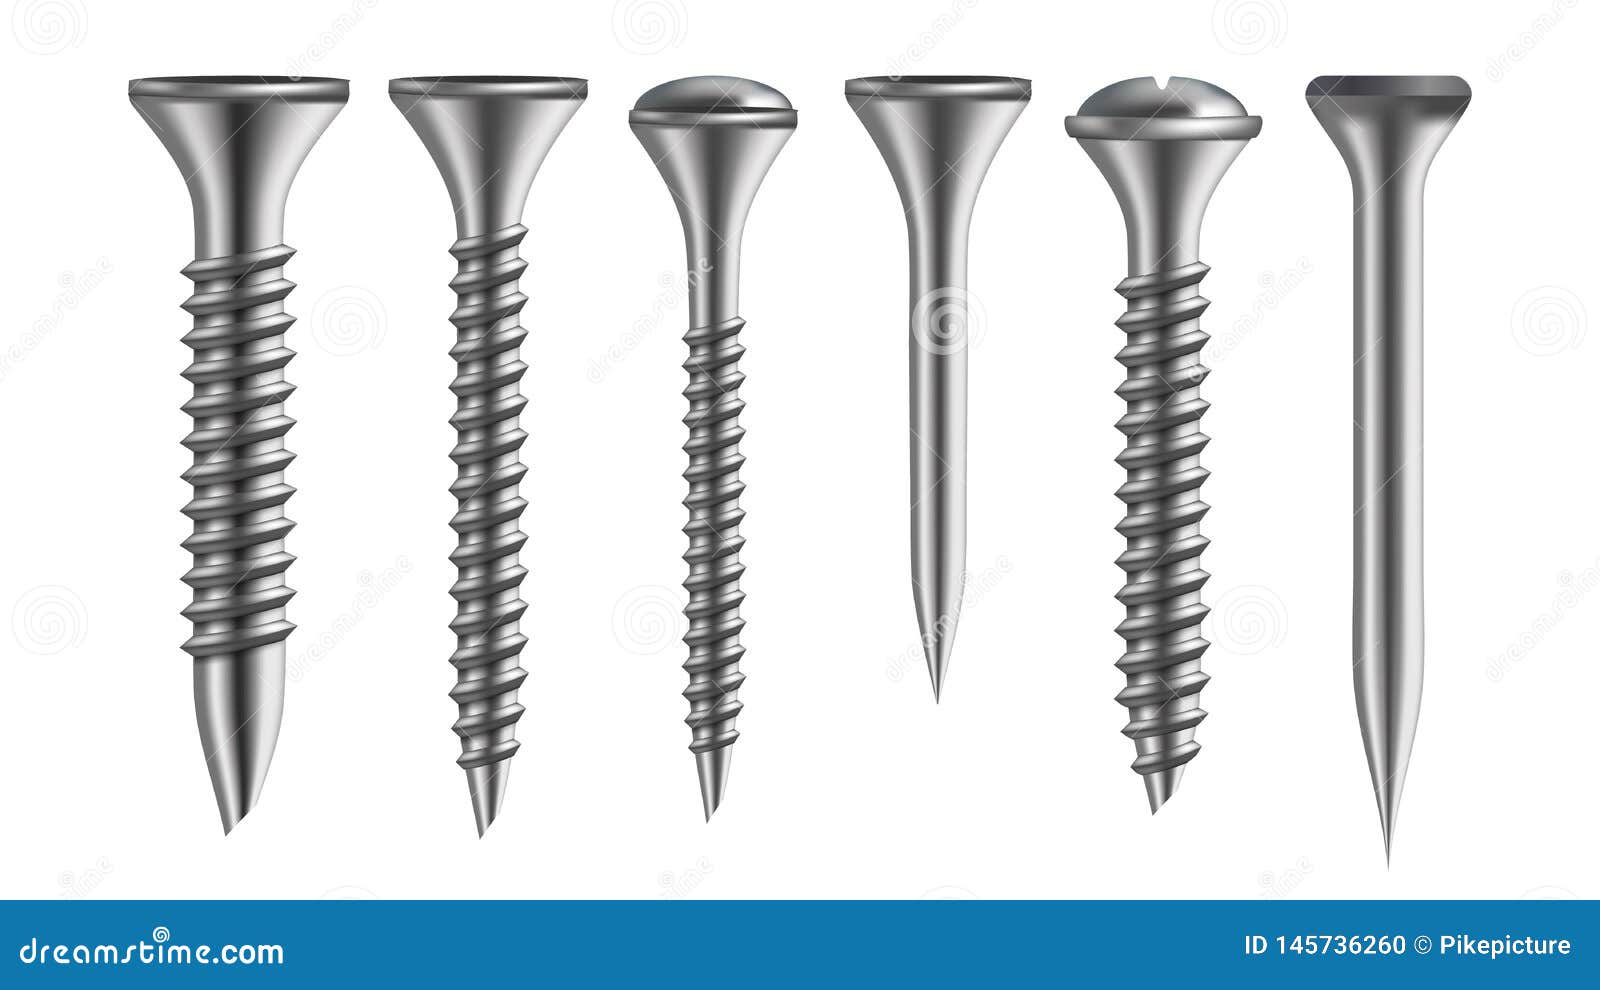 Auger Screws Stock Illustrations, Cliparts and Royalty Free Auger Screws  Vectors